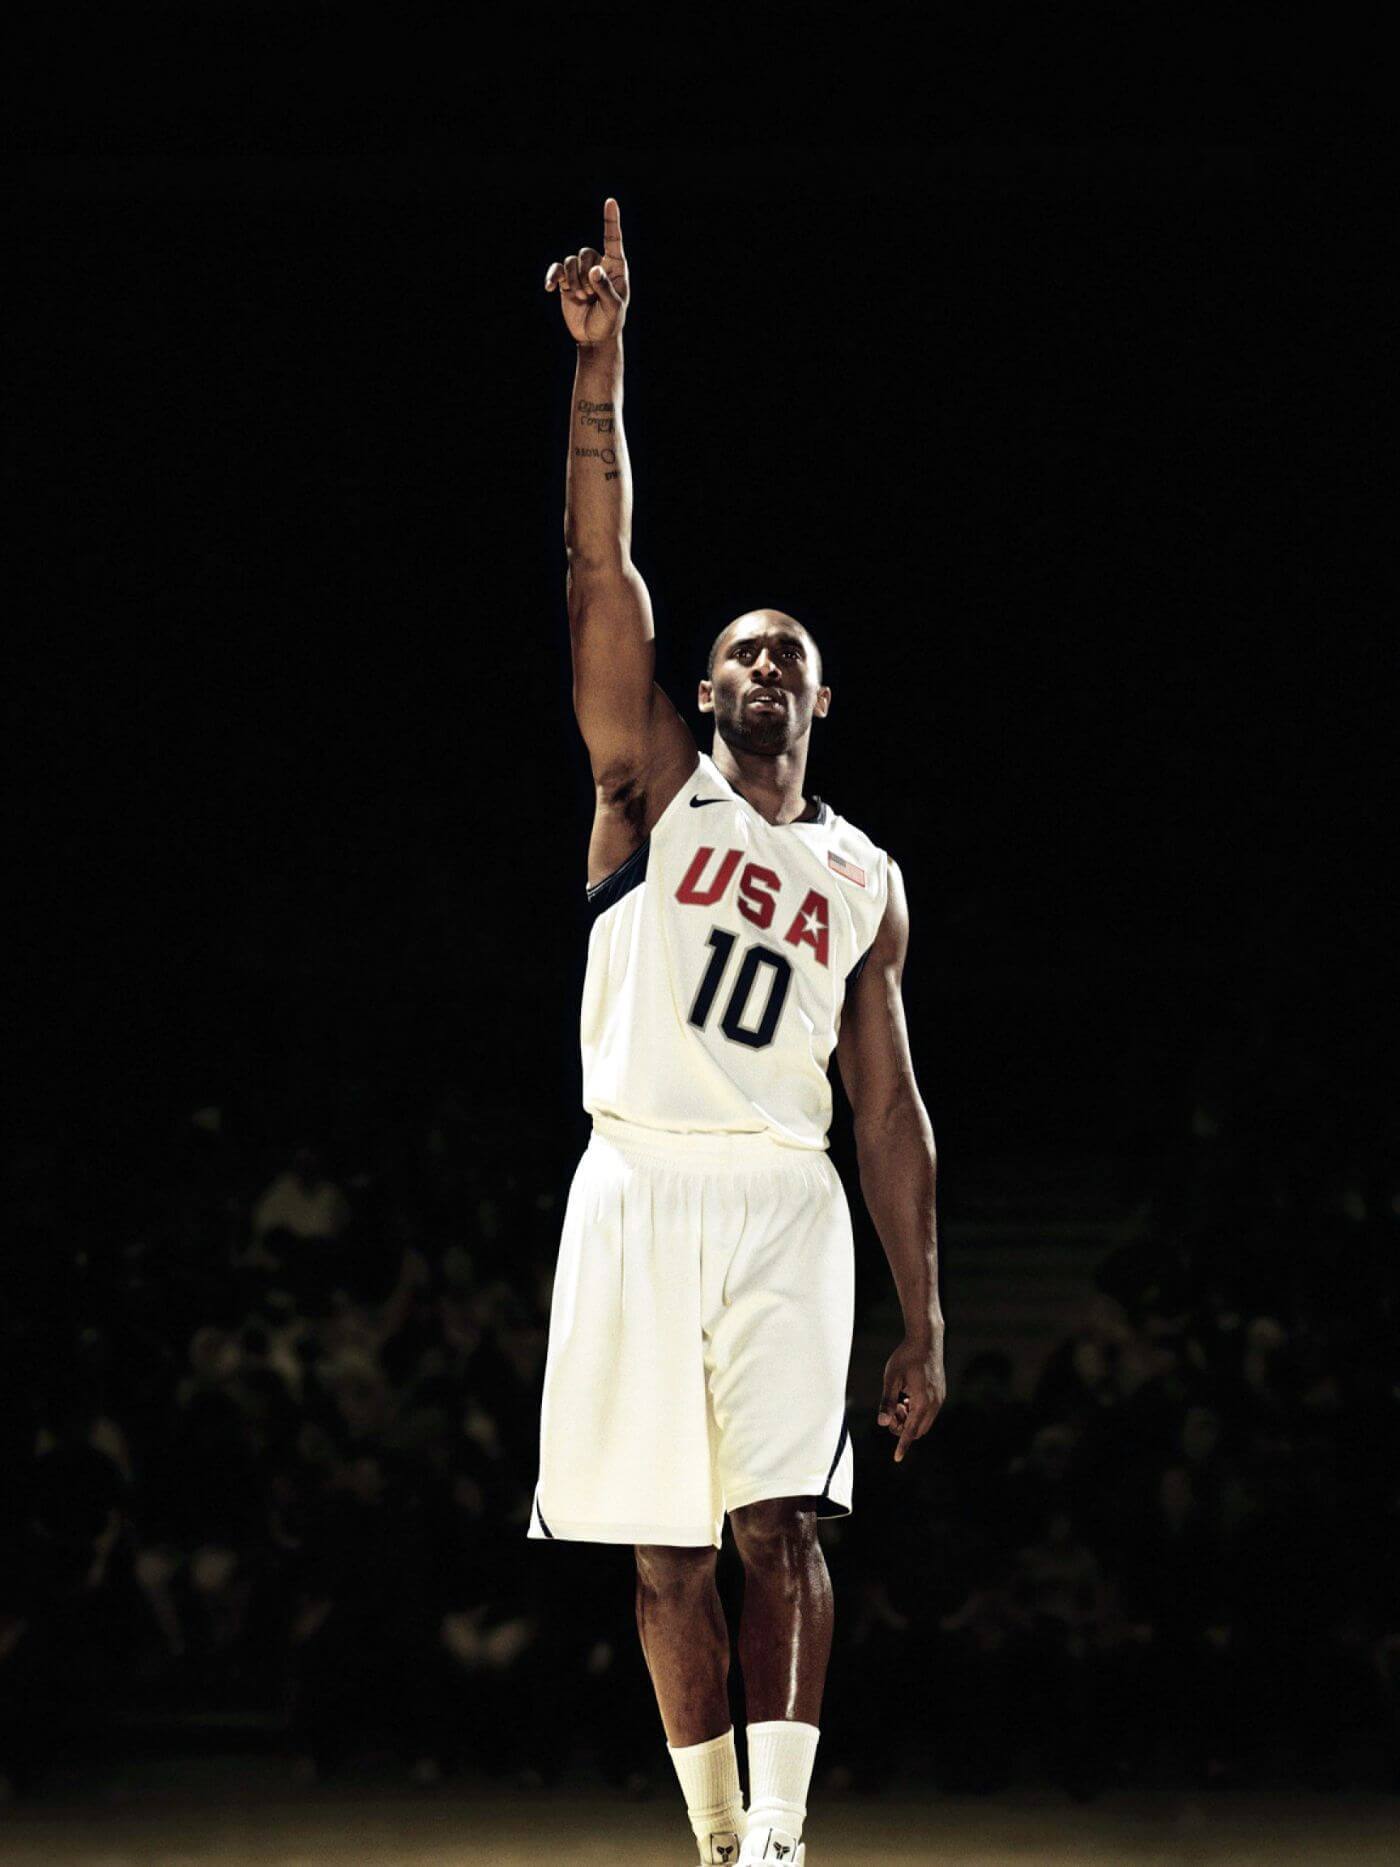 Los Angeles Kobe Bryant White Jersey With Ball Poster (24x36) inches